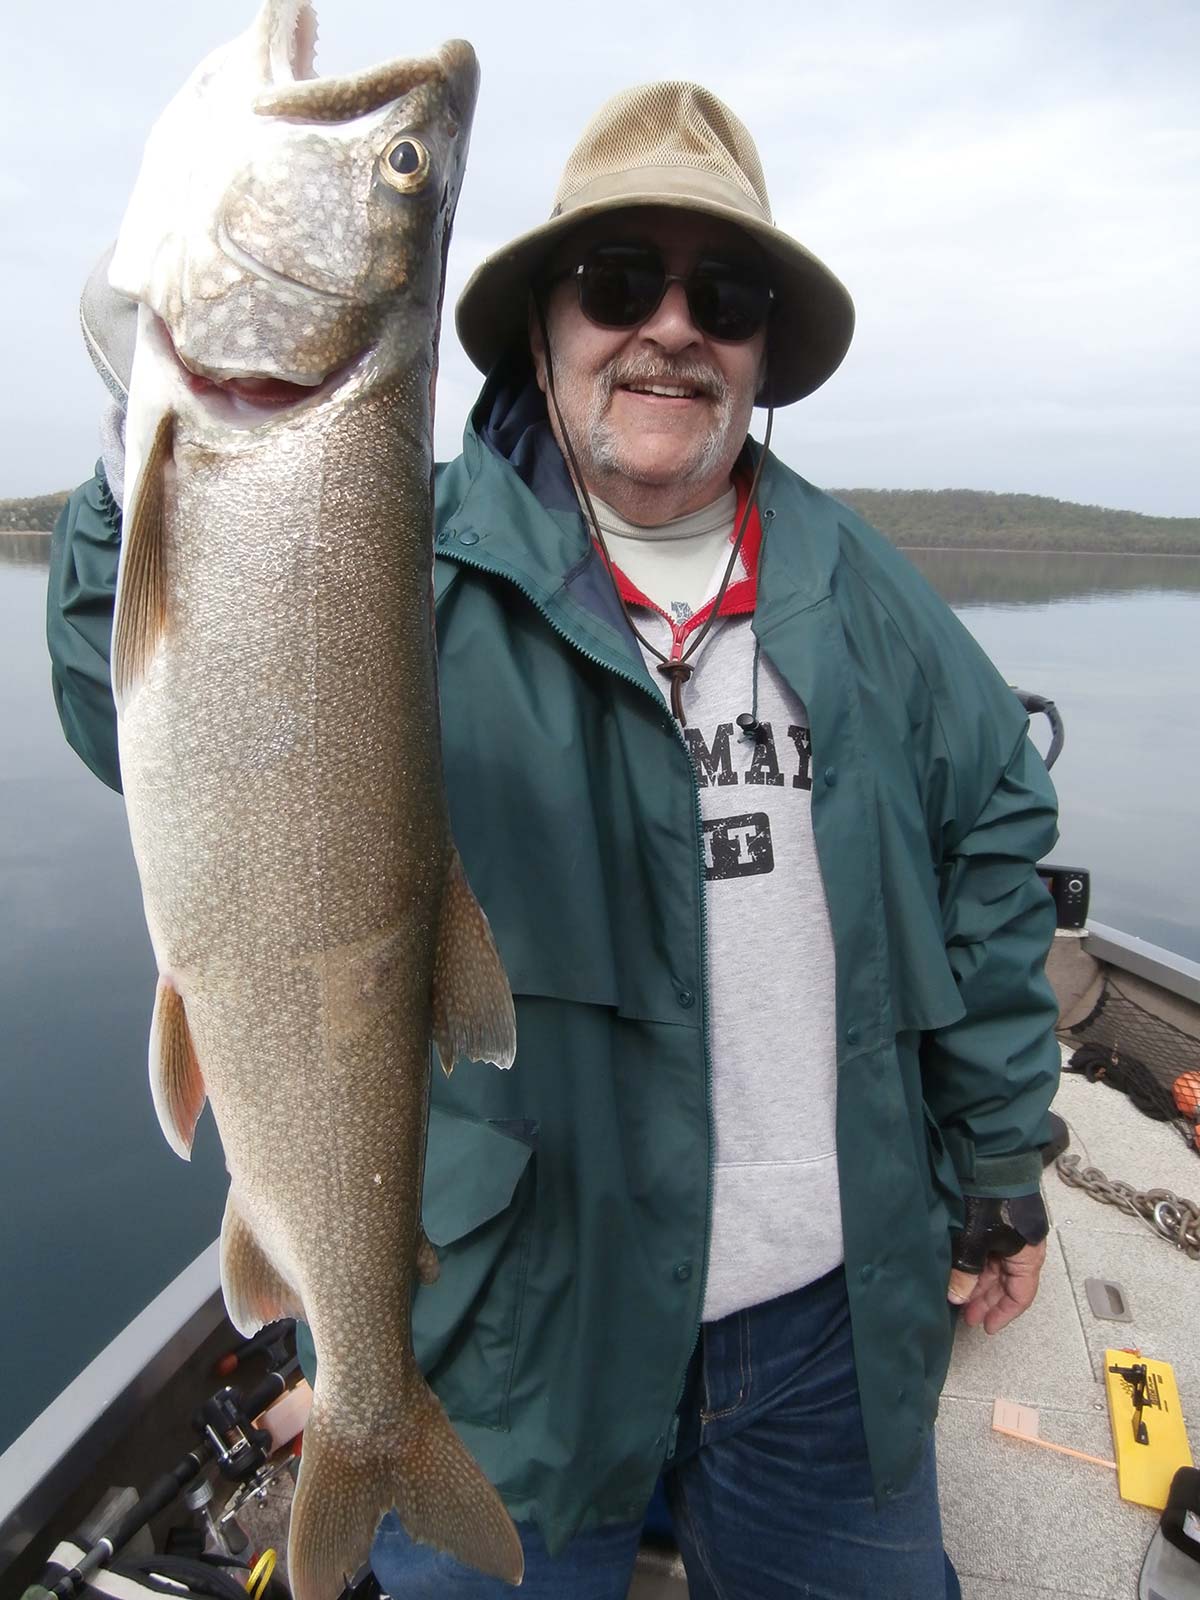 Lake Trout Tactics: For Late Winter Success - The Fisherman